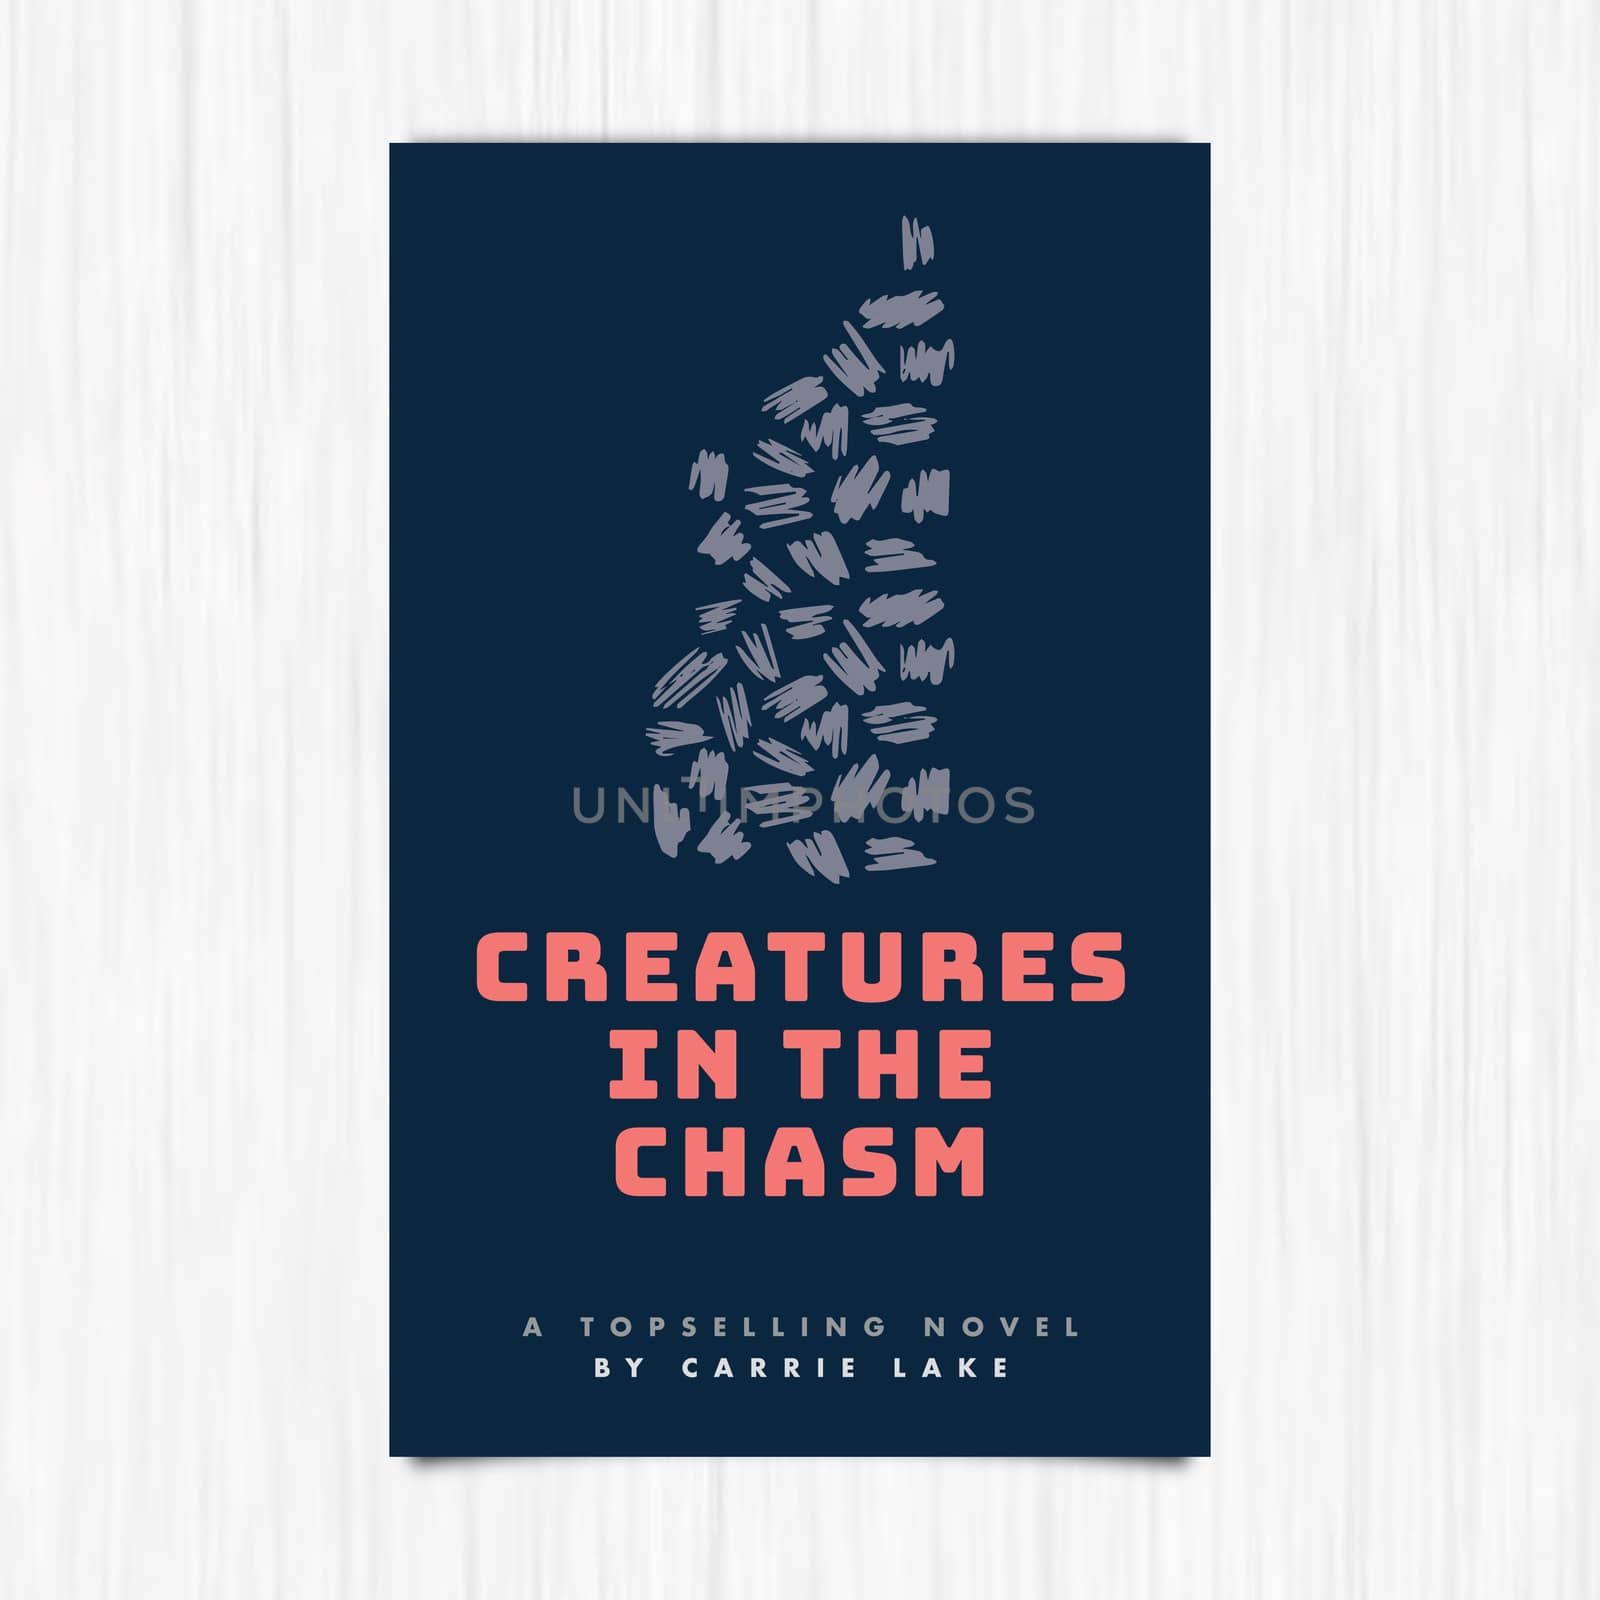 Vector of novel cover with creatures in the chasm text by Wavebreakmedia